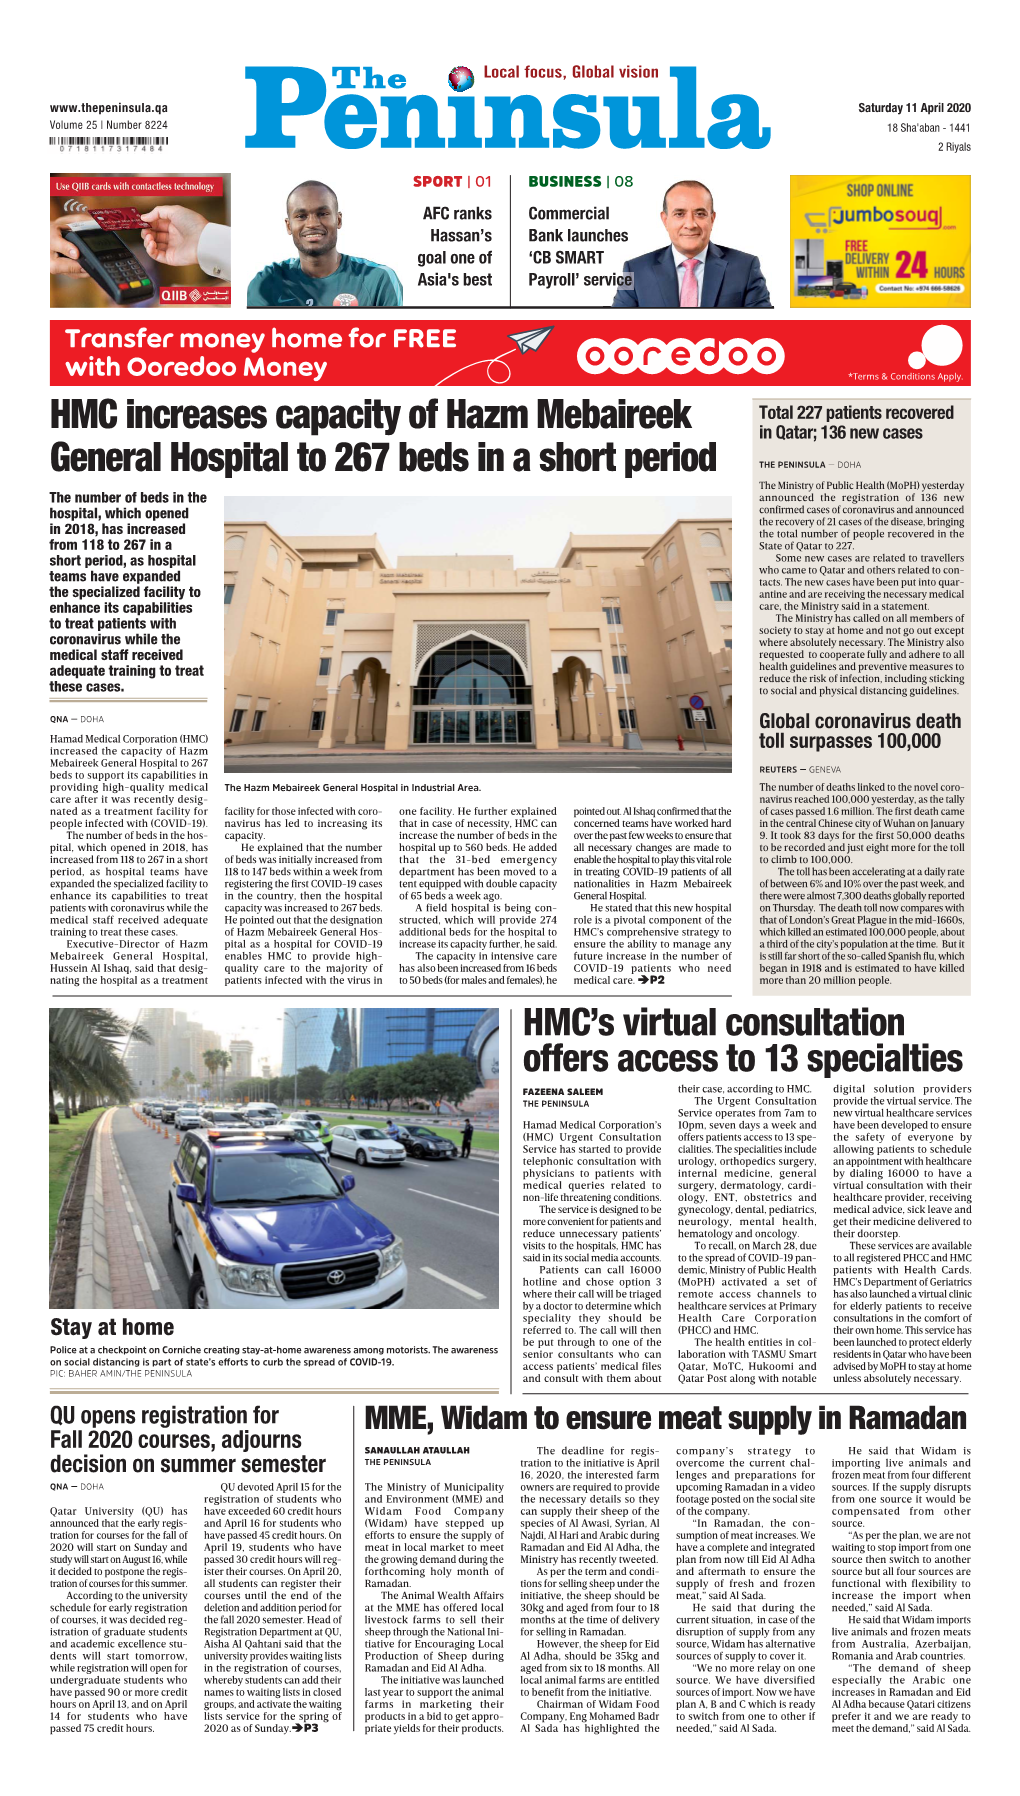 HMC Increases Capacity of Hazm Mebaireek General Hospital to 267 Beds in a Short Period